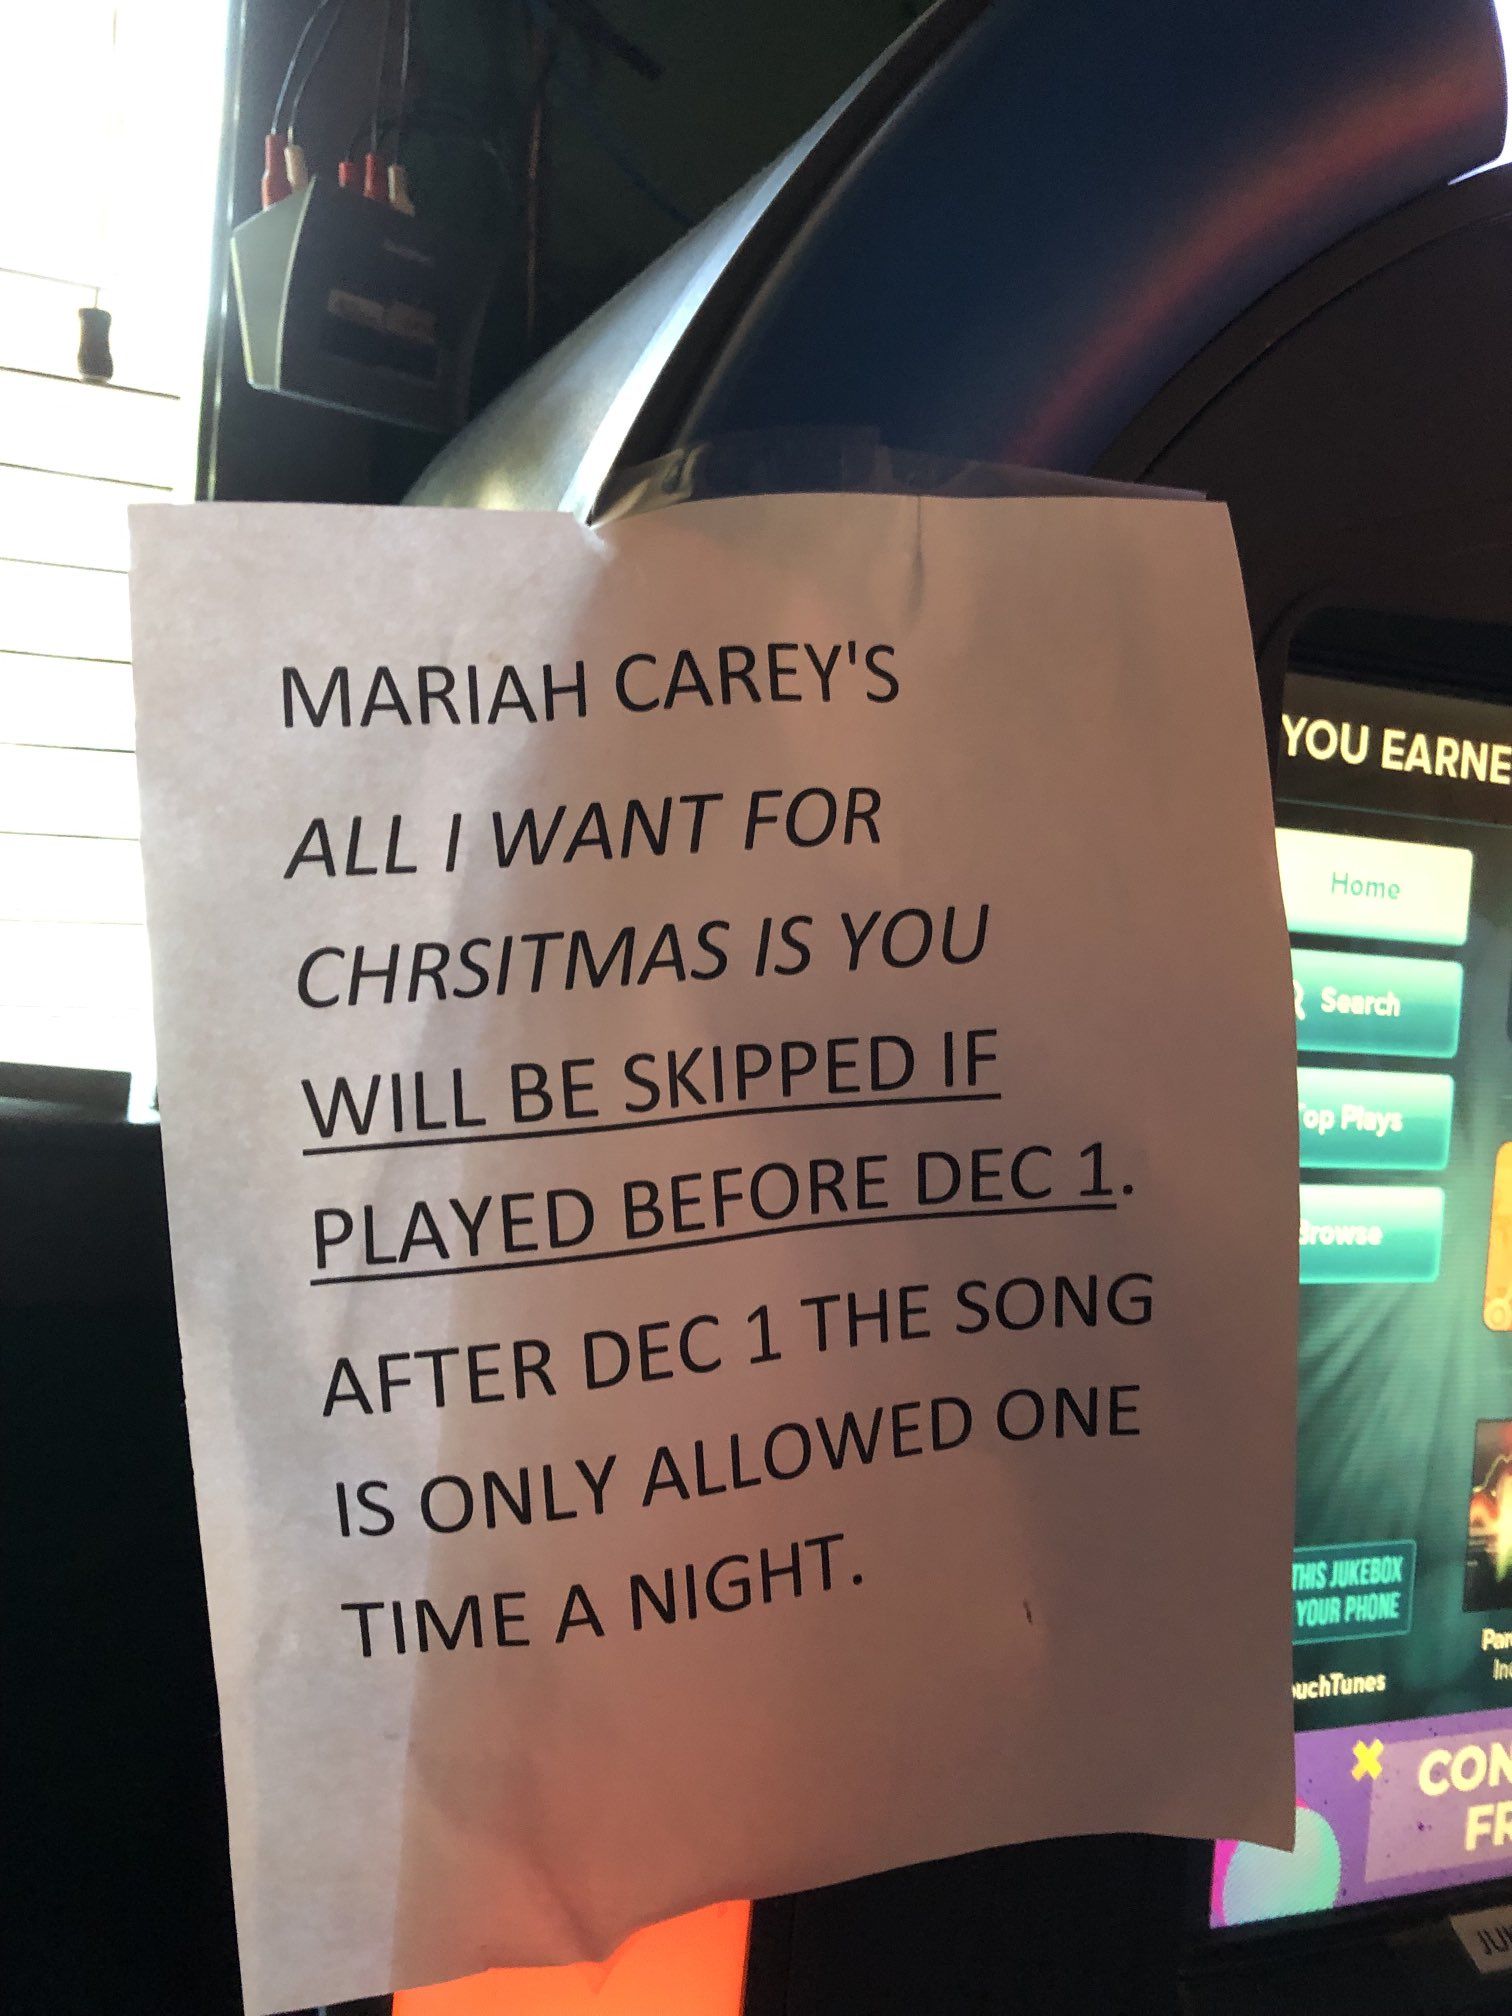 Seen on a Jukebox in Dallas...